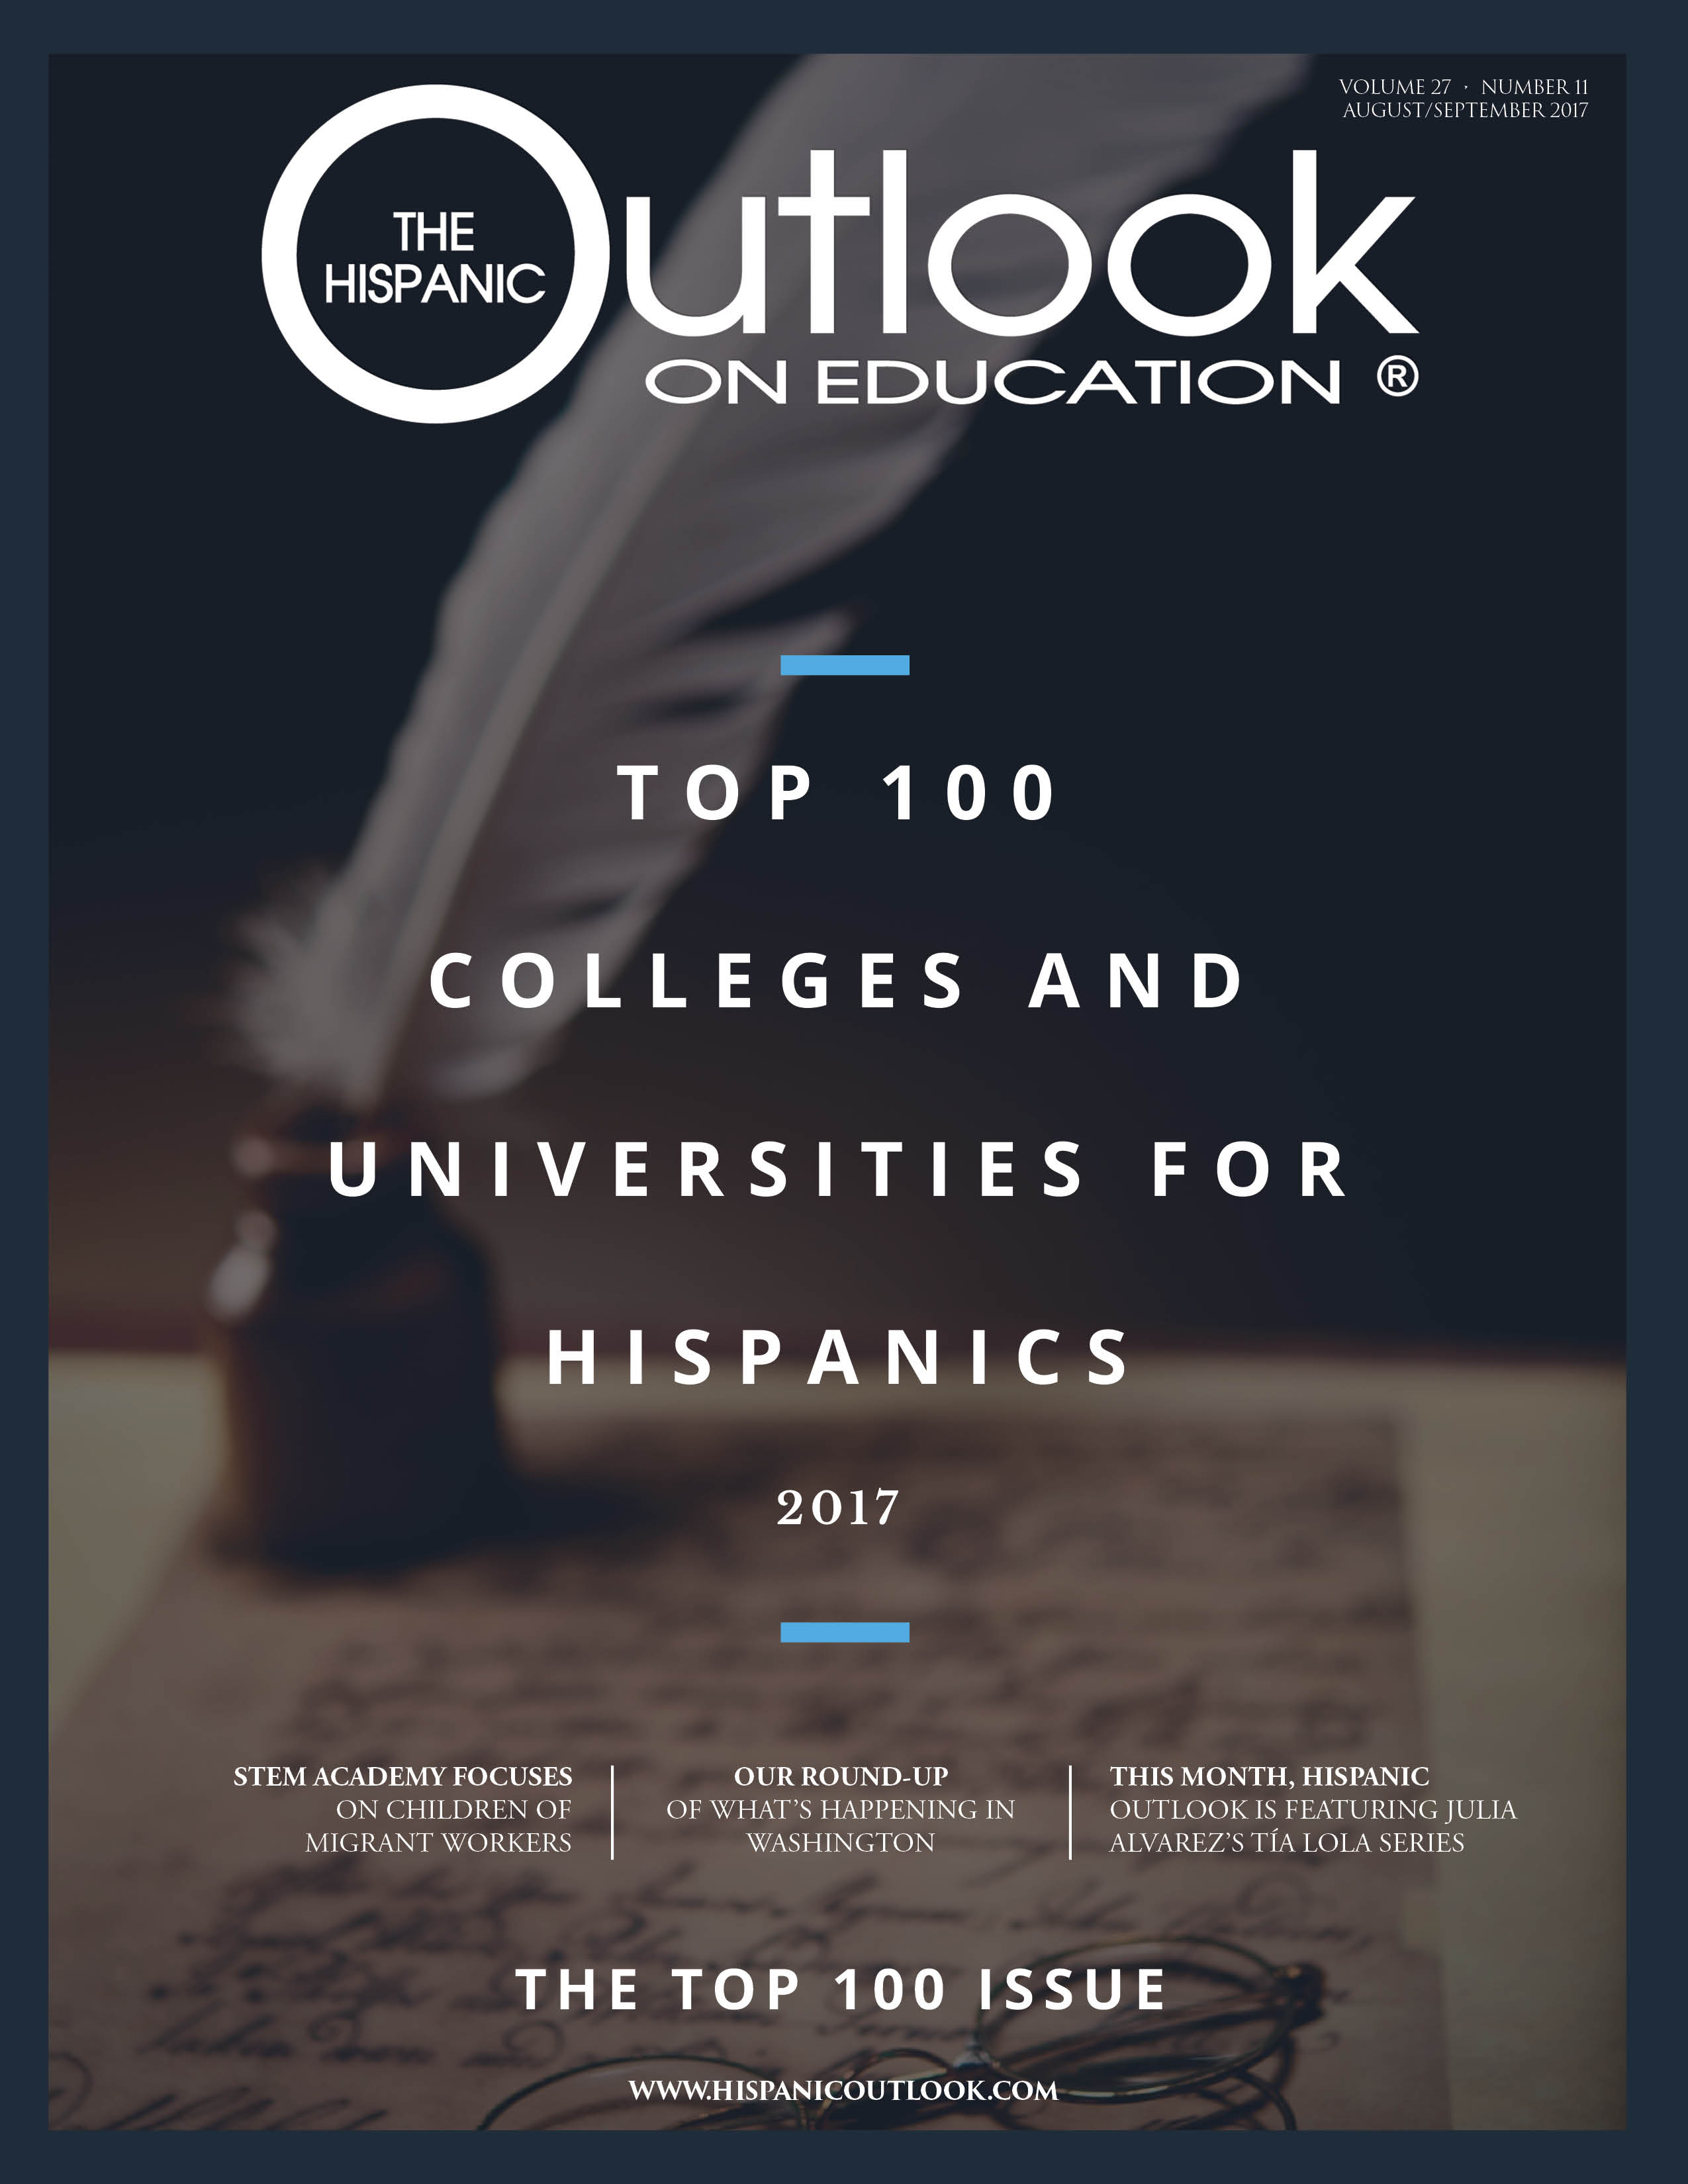 Top 100 Colleges and Universities for Hispanics